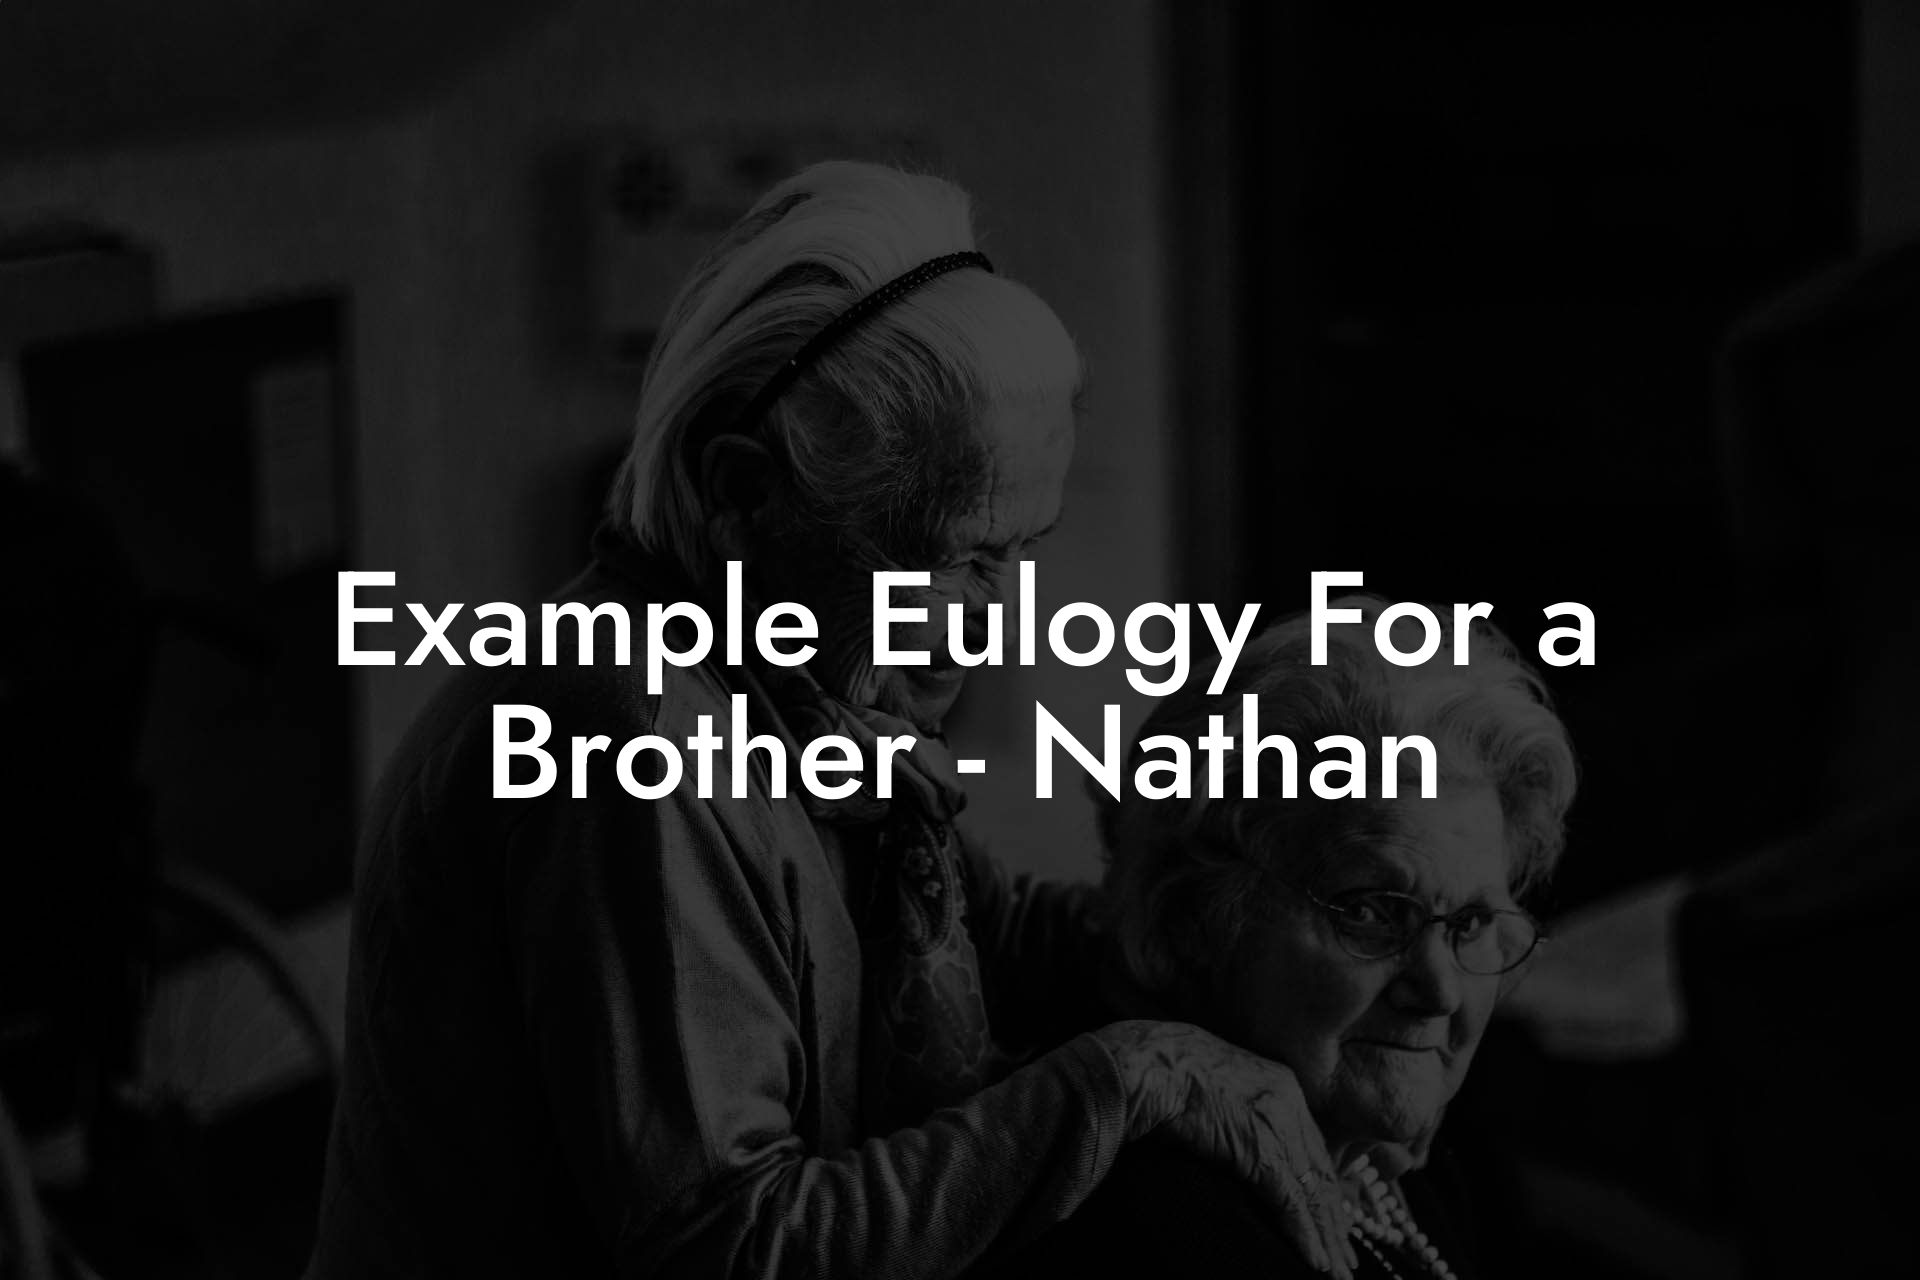 Example Eulogy For a Brother - Nathan